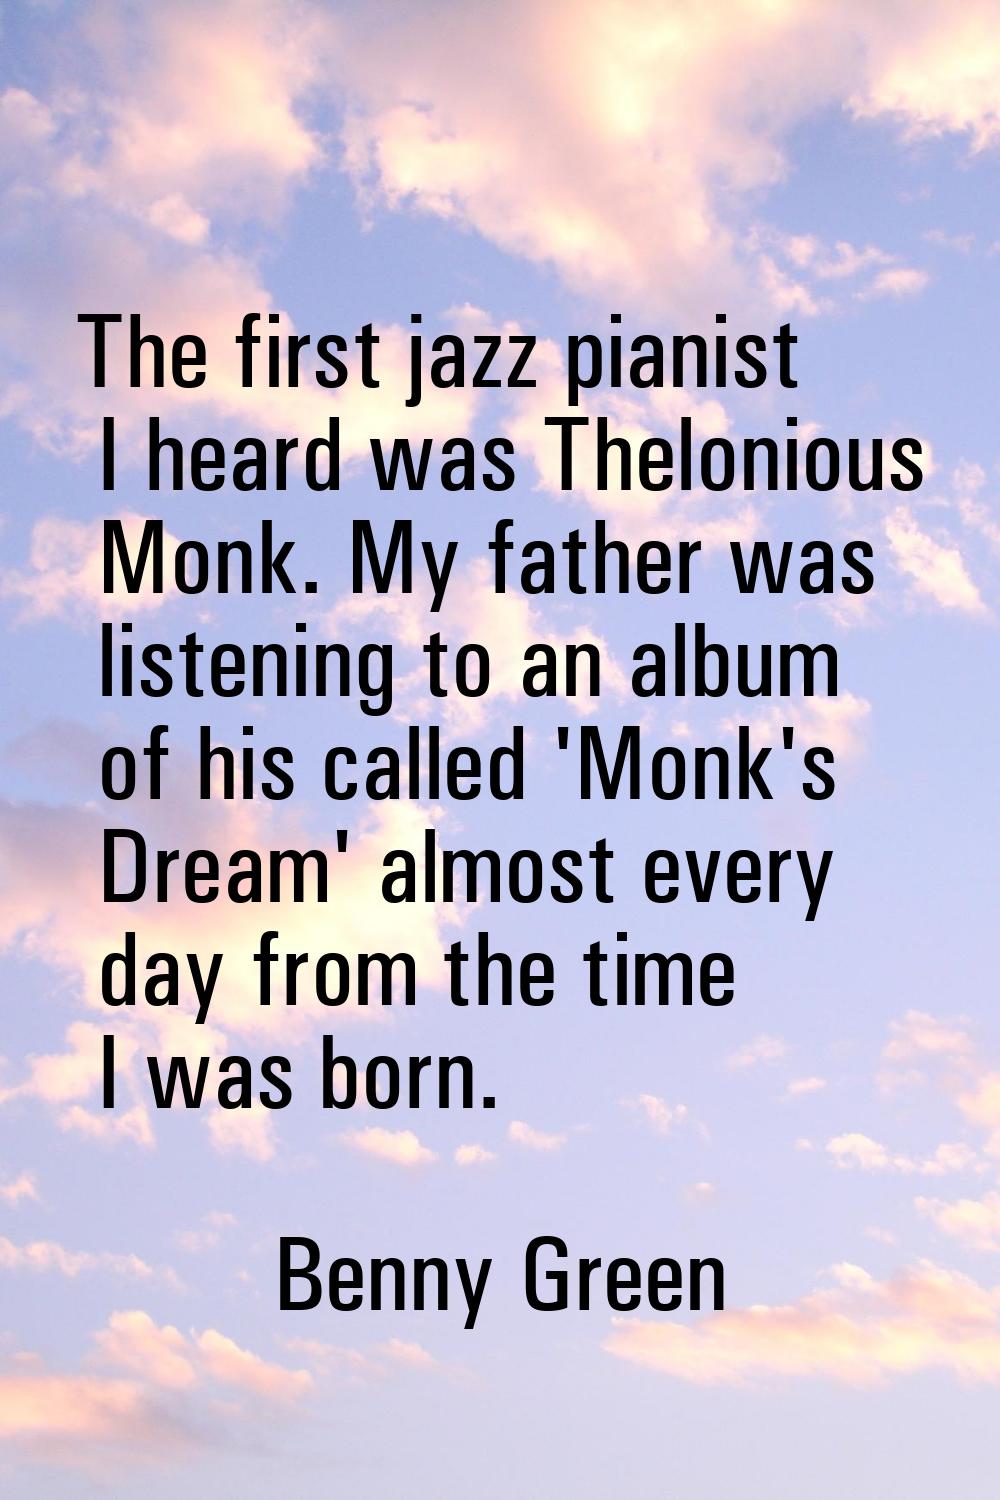 The first jazz pianist I heard was Thelonious Monk. My father was listening to an album of his call